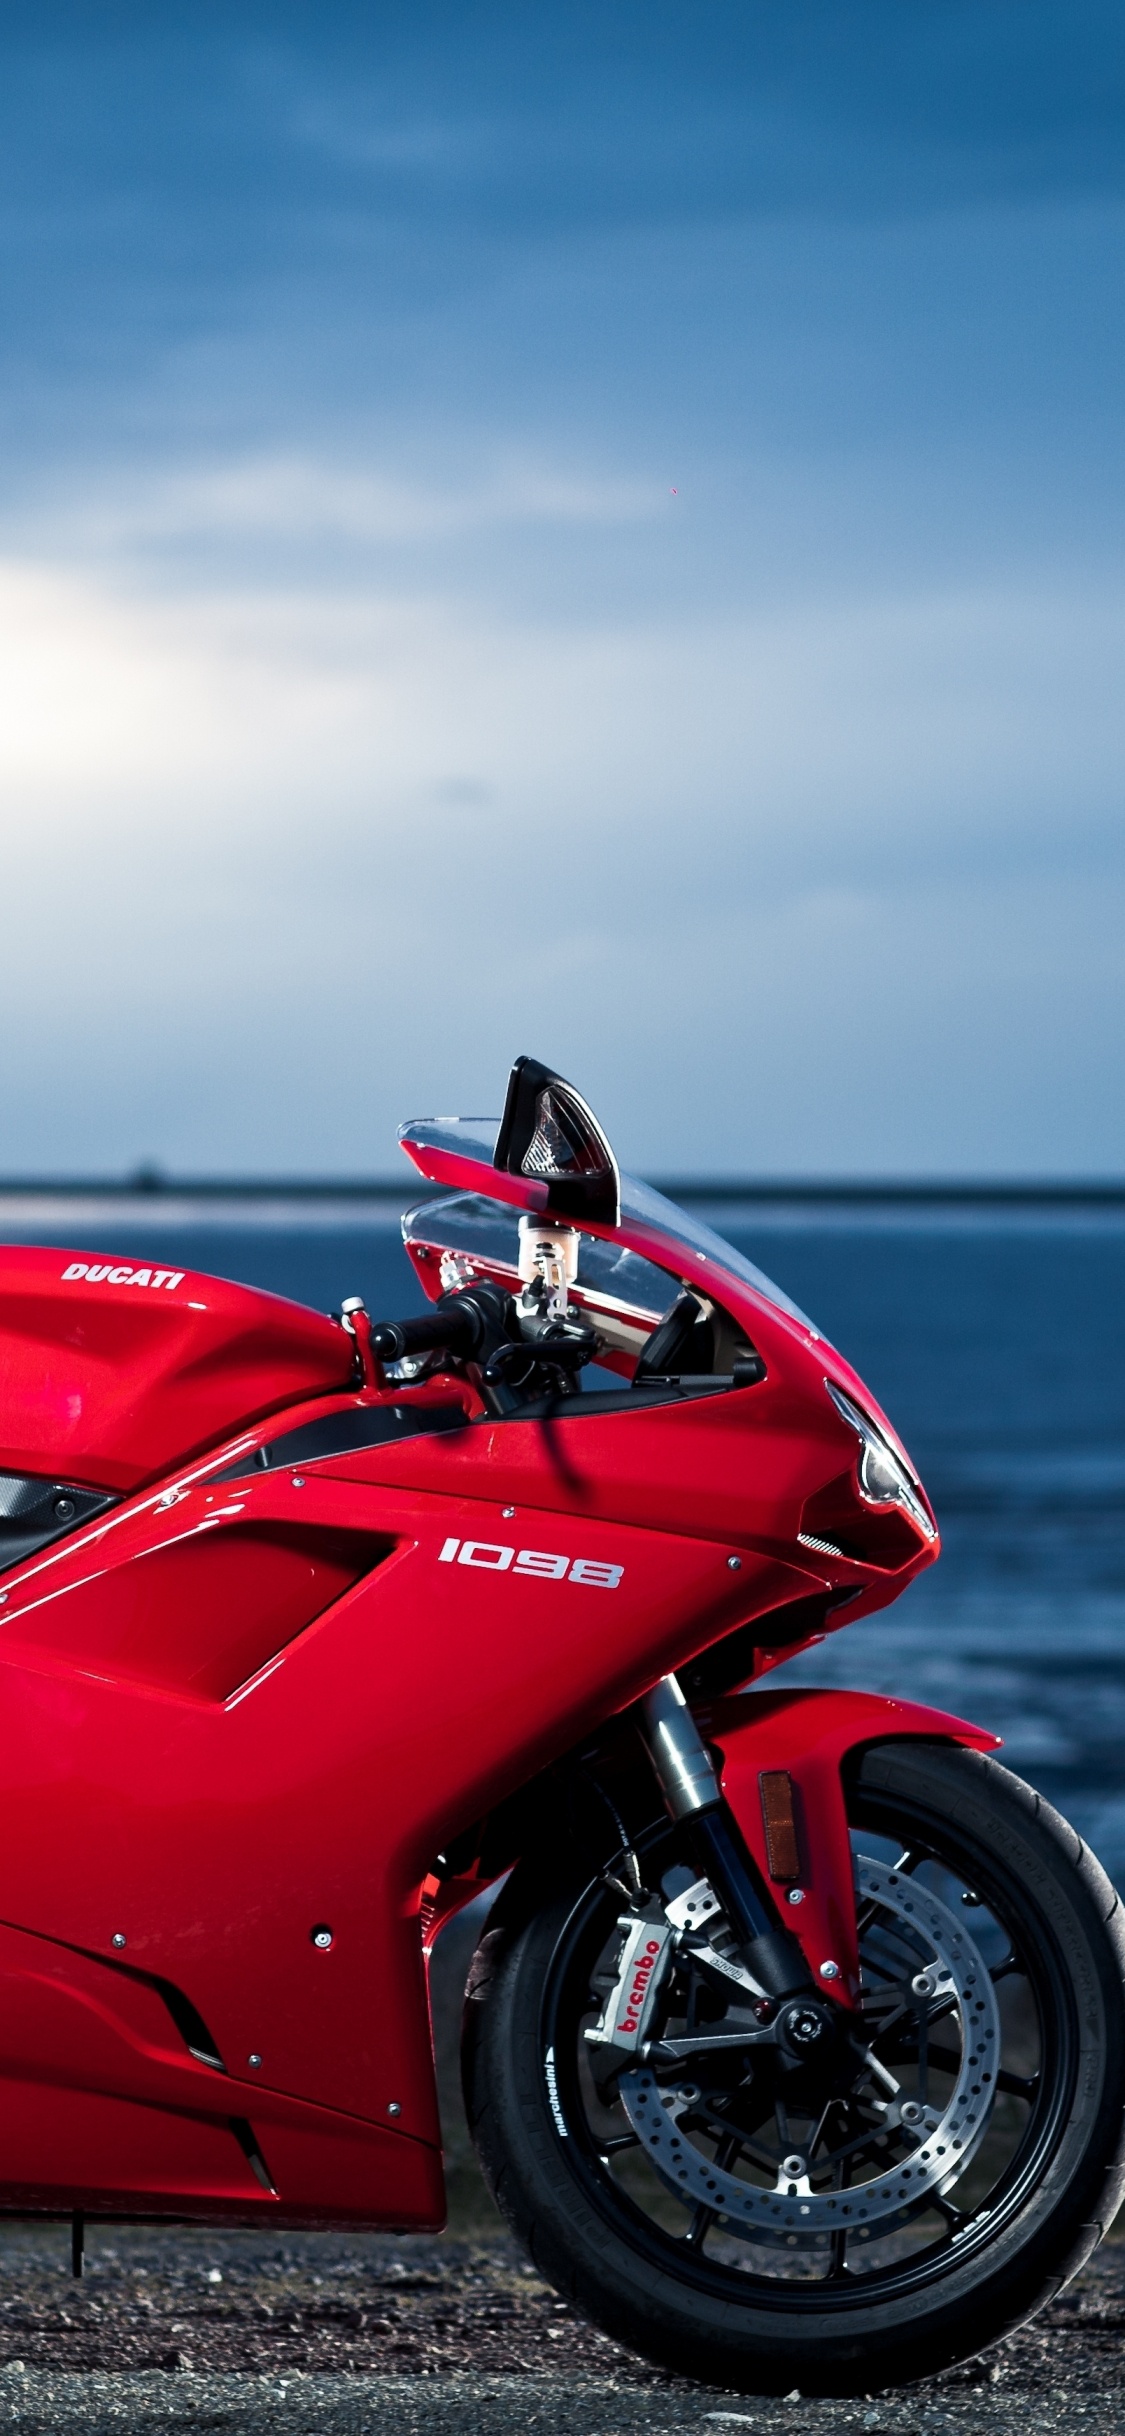 Red and Black Sports Bike on Seashore During Daytime. Wallpaper in 1125x2436 Resolution